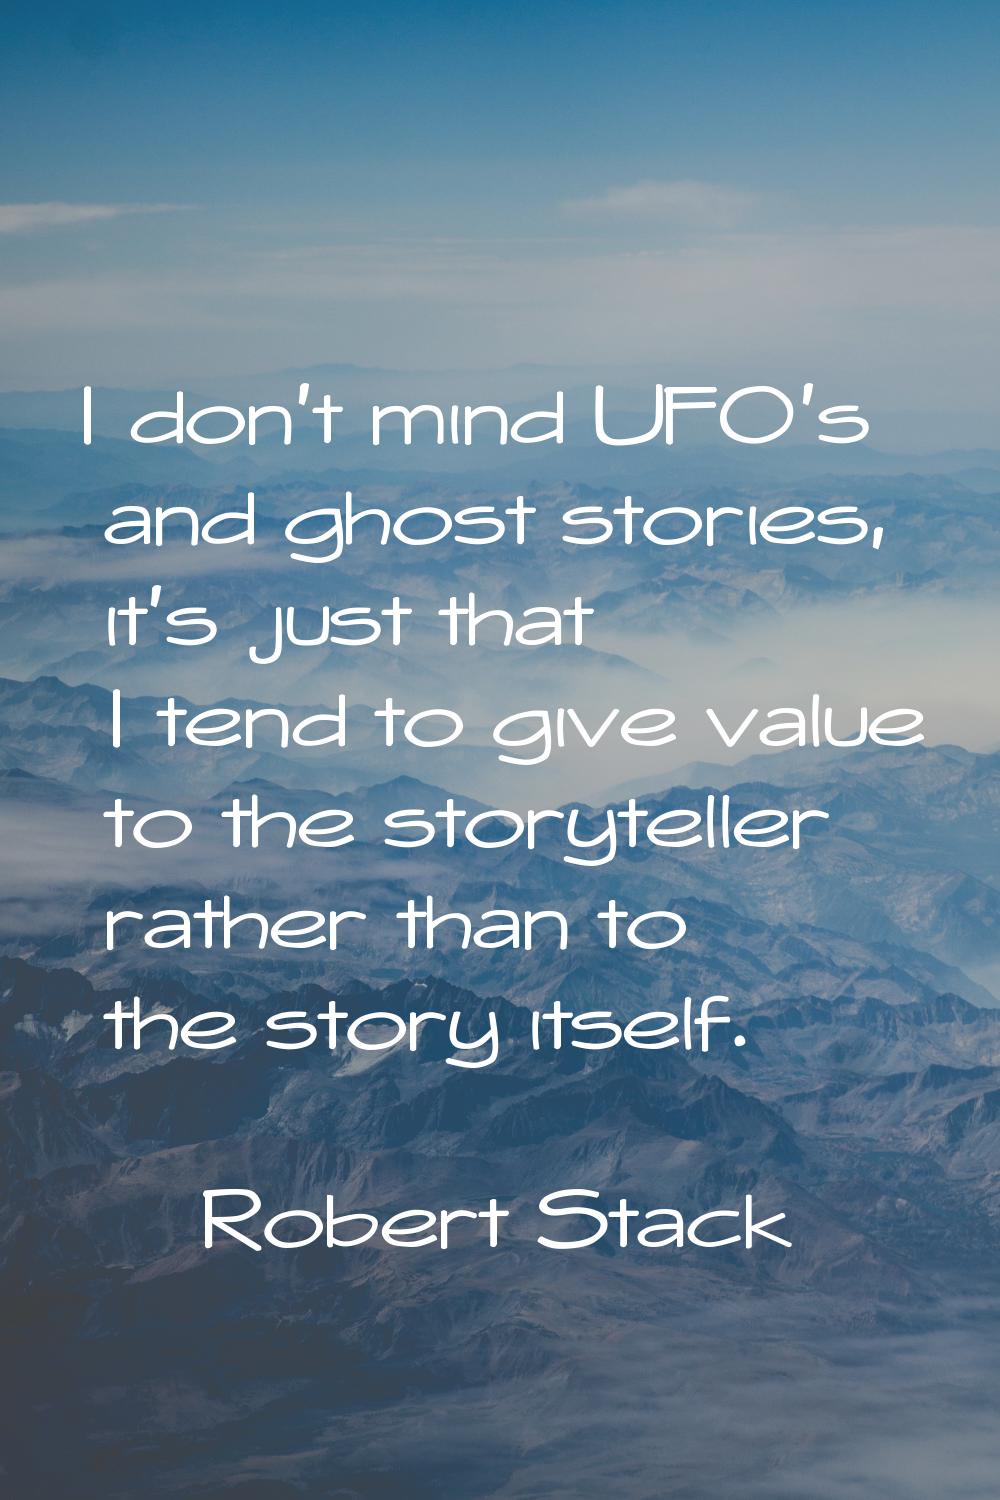 I don't mind UFO's and ghost stories, it's just that I tend to give value to the storyteller rather